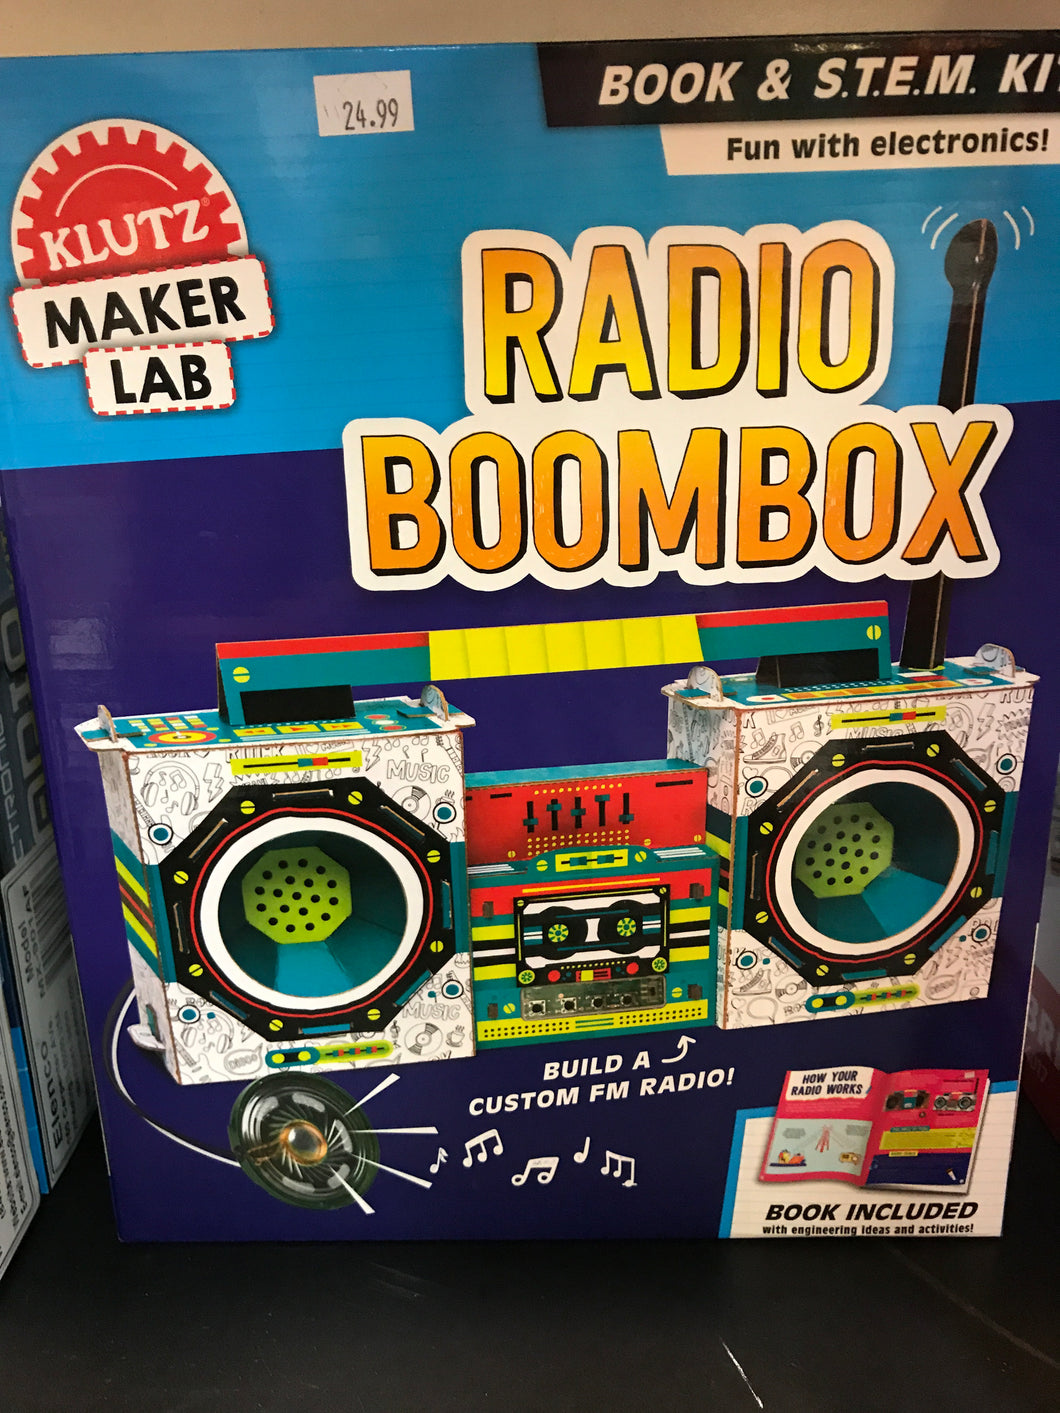 Klutz - Radio Boombox (book and S.T.E.M. Kit)